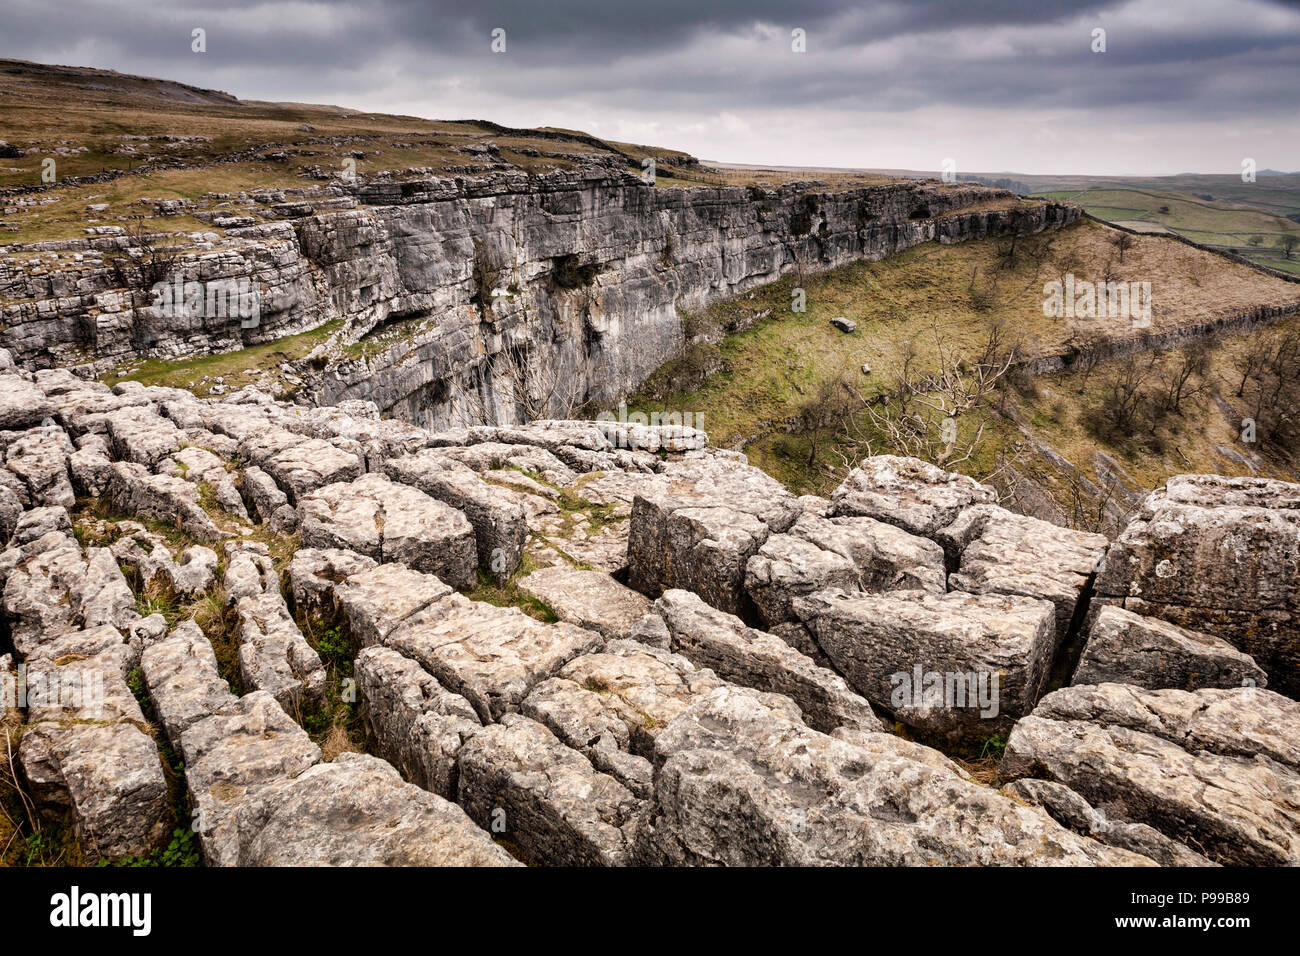 Limestone karst at Malham Cove, Yorkshire Dales, North Yorkshire, England, formed by a waterfall... Stock Photo